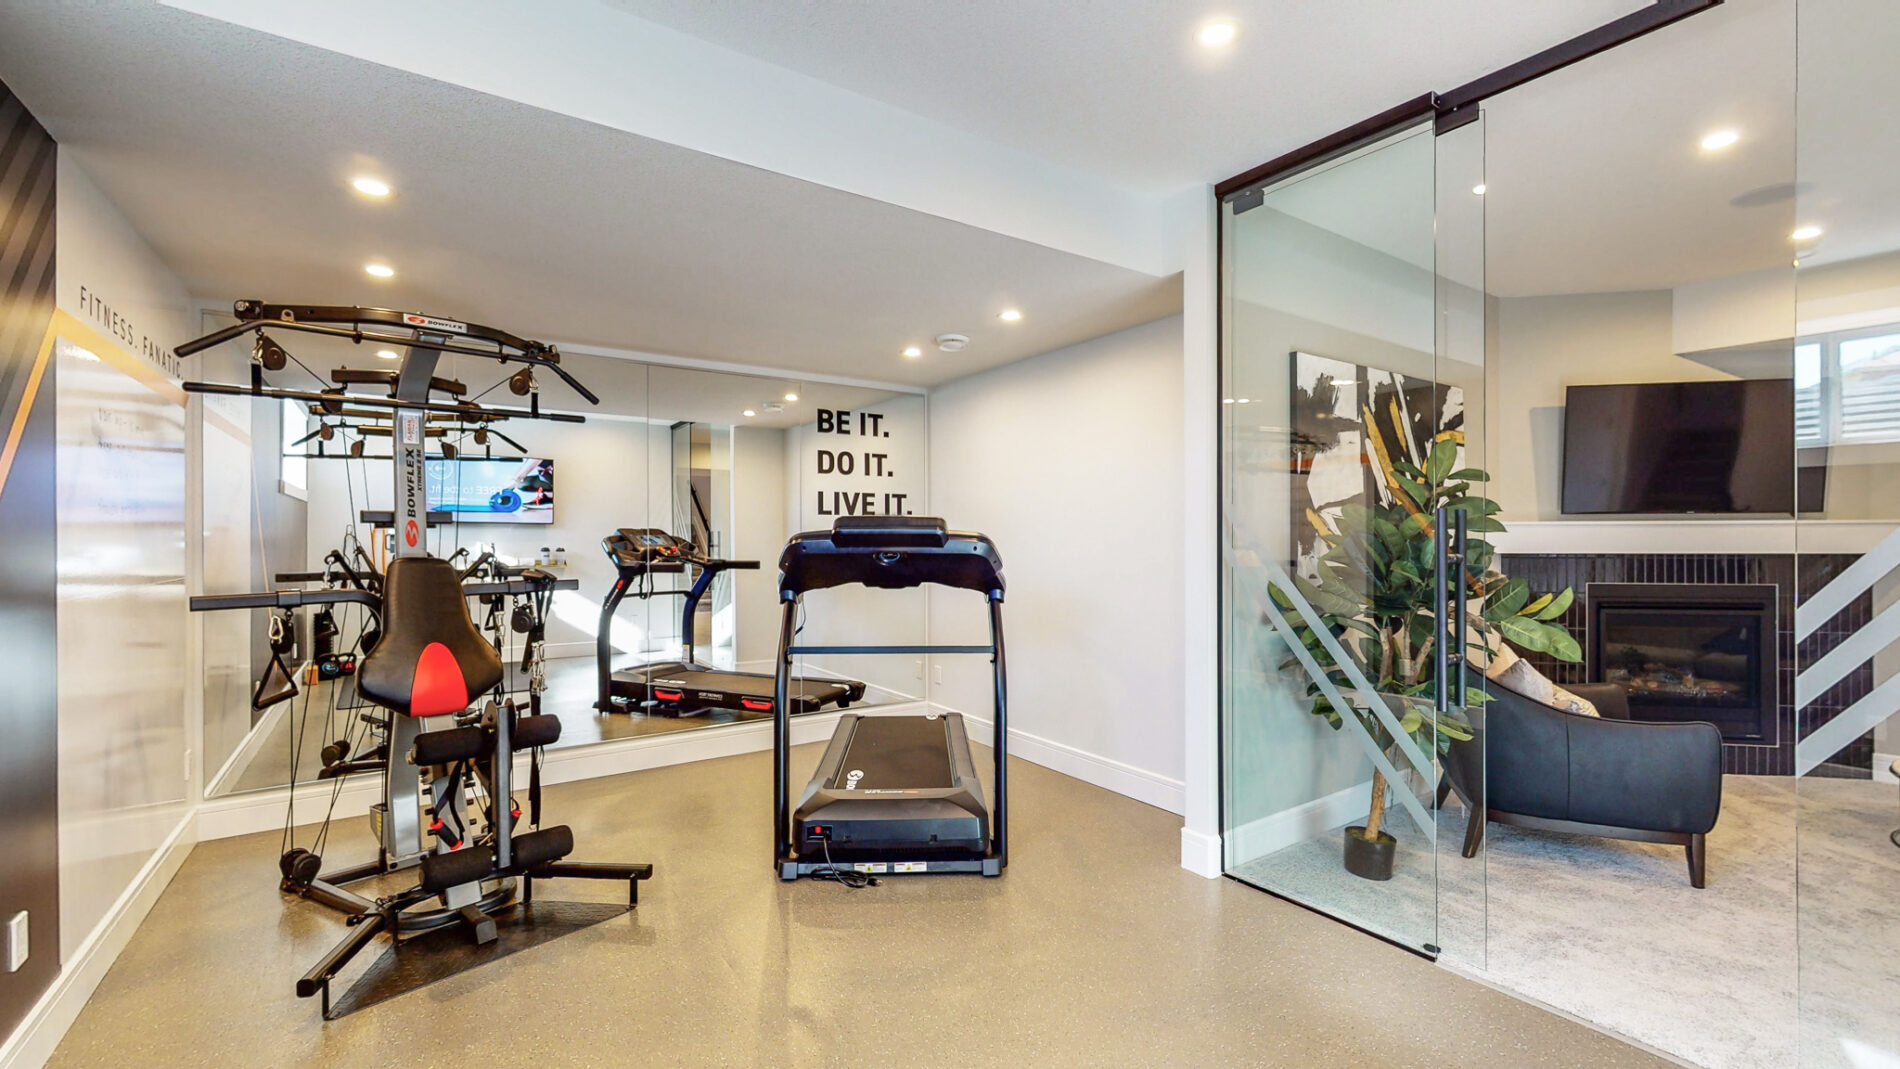 Home gym in the Kail showhome with glass wall separating the gym from the family room, light rubber flooring, floor to ceiling mirror on one wall and gym equipment centered in the room